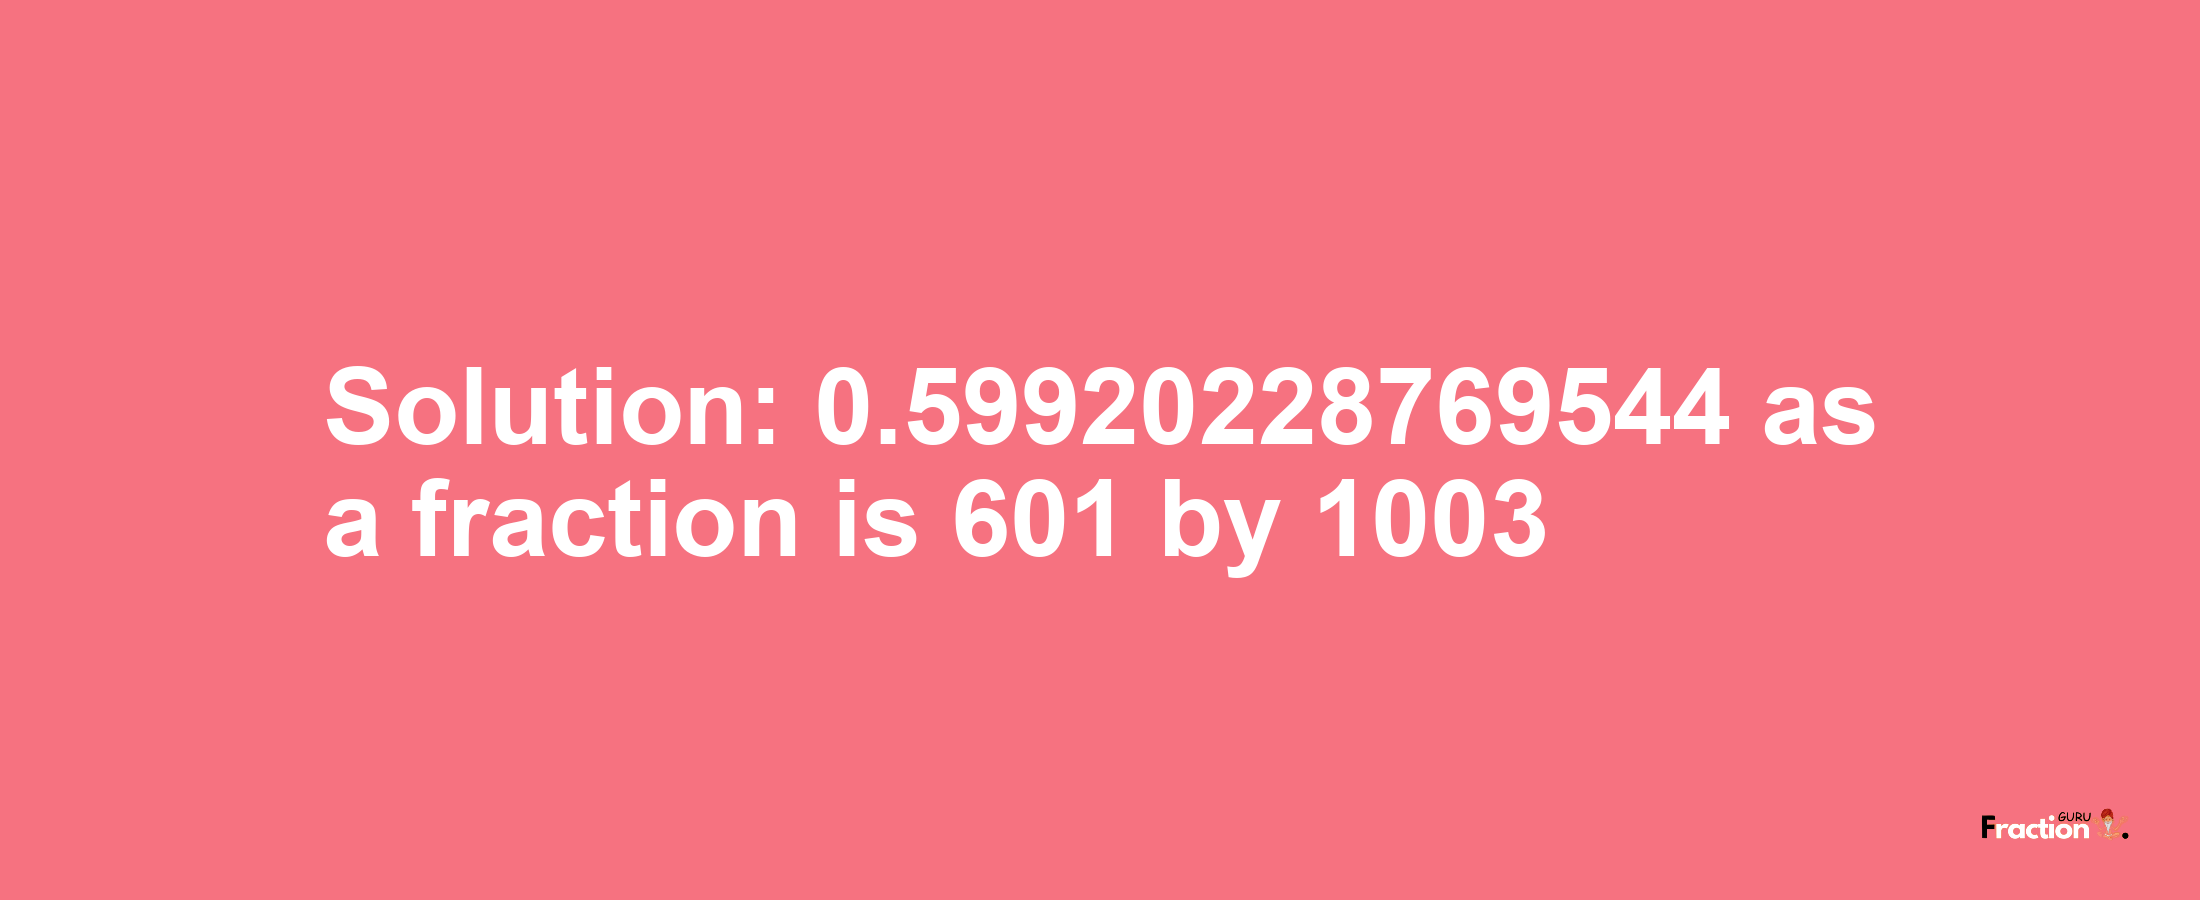 Solution:0.59920228769544 as a fraction is 601/1003